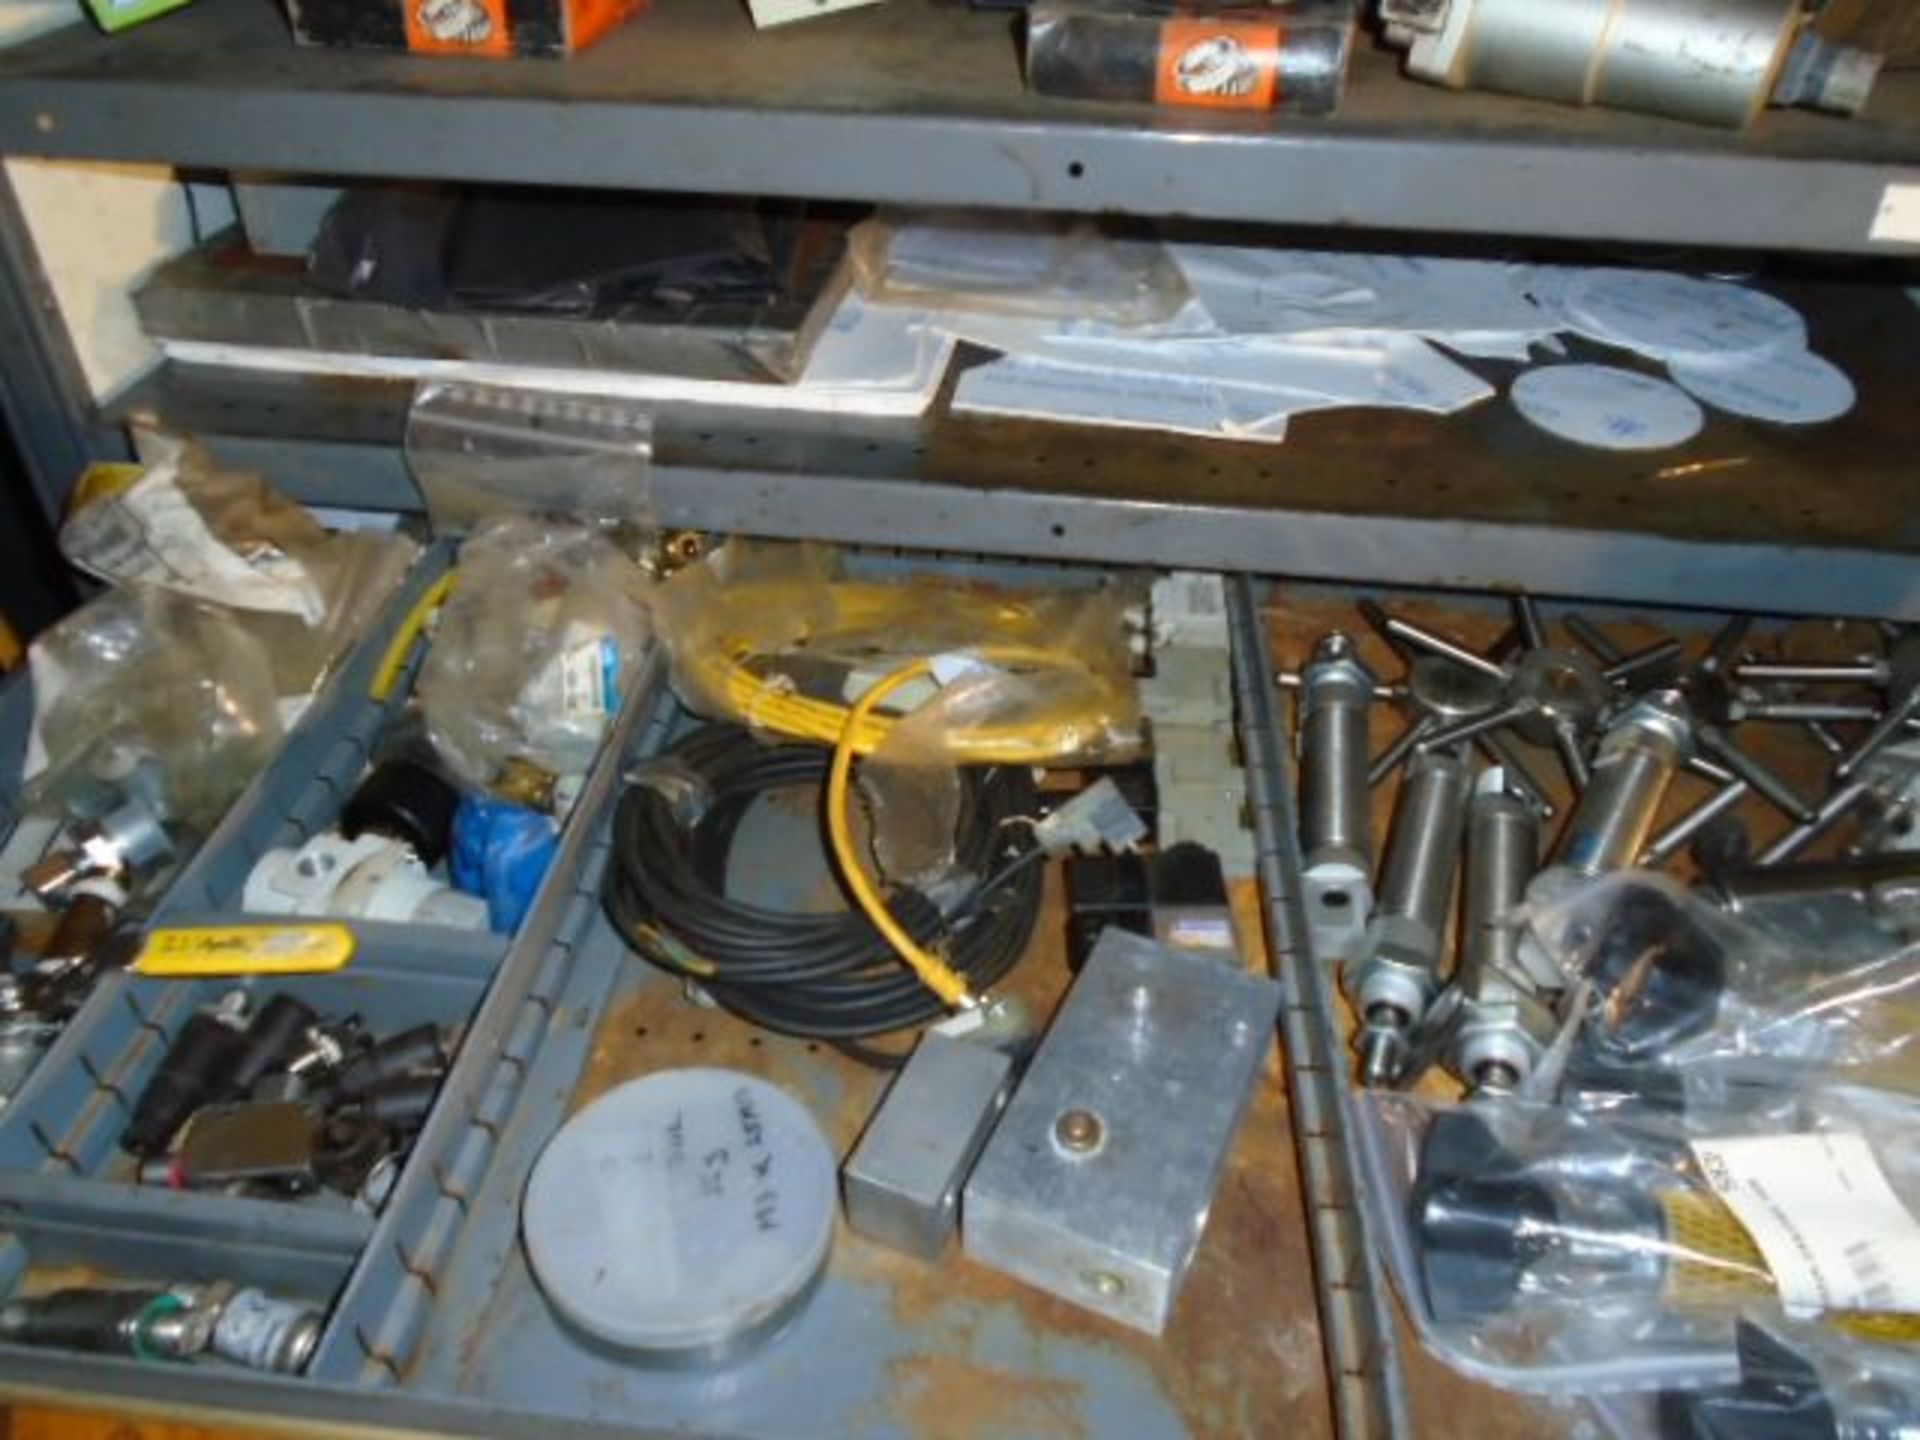 Shelves and Drawers and Contents( Assorted Part, Nuts, Bolts) - Image 4 of 12